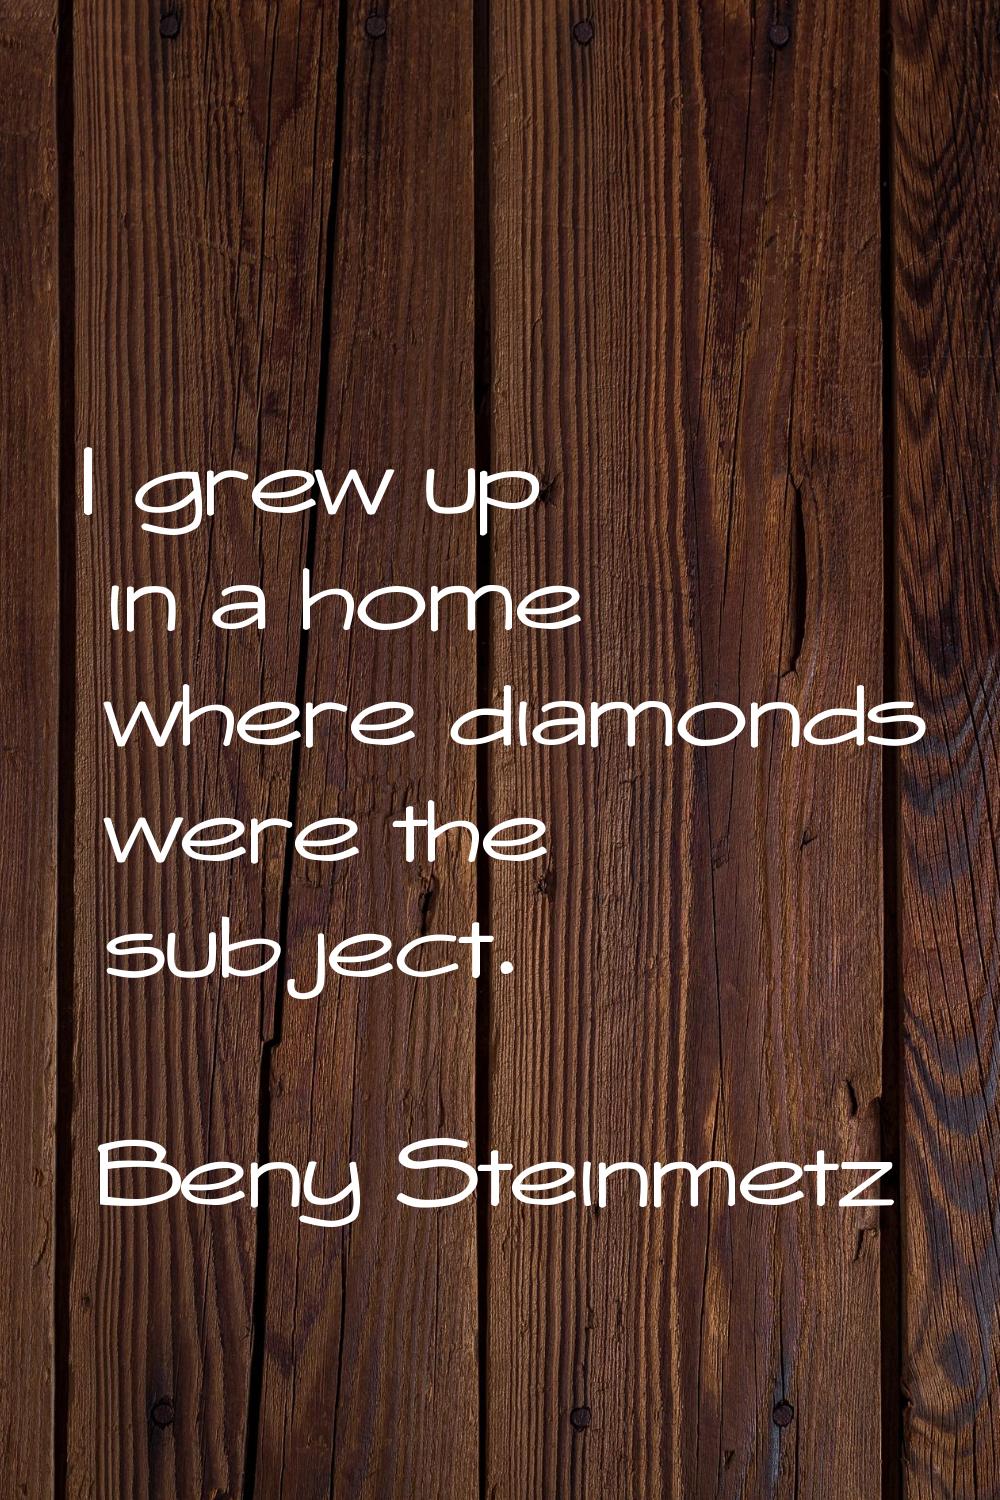 I grew up in a home where diamonds were the subject.